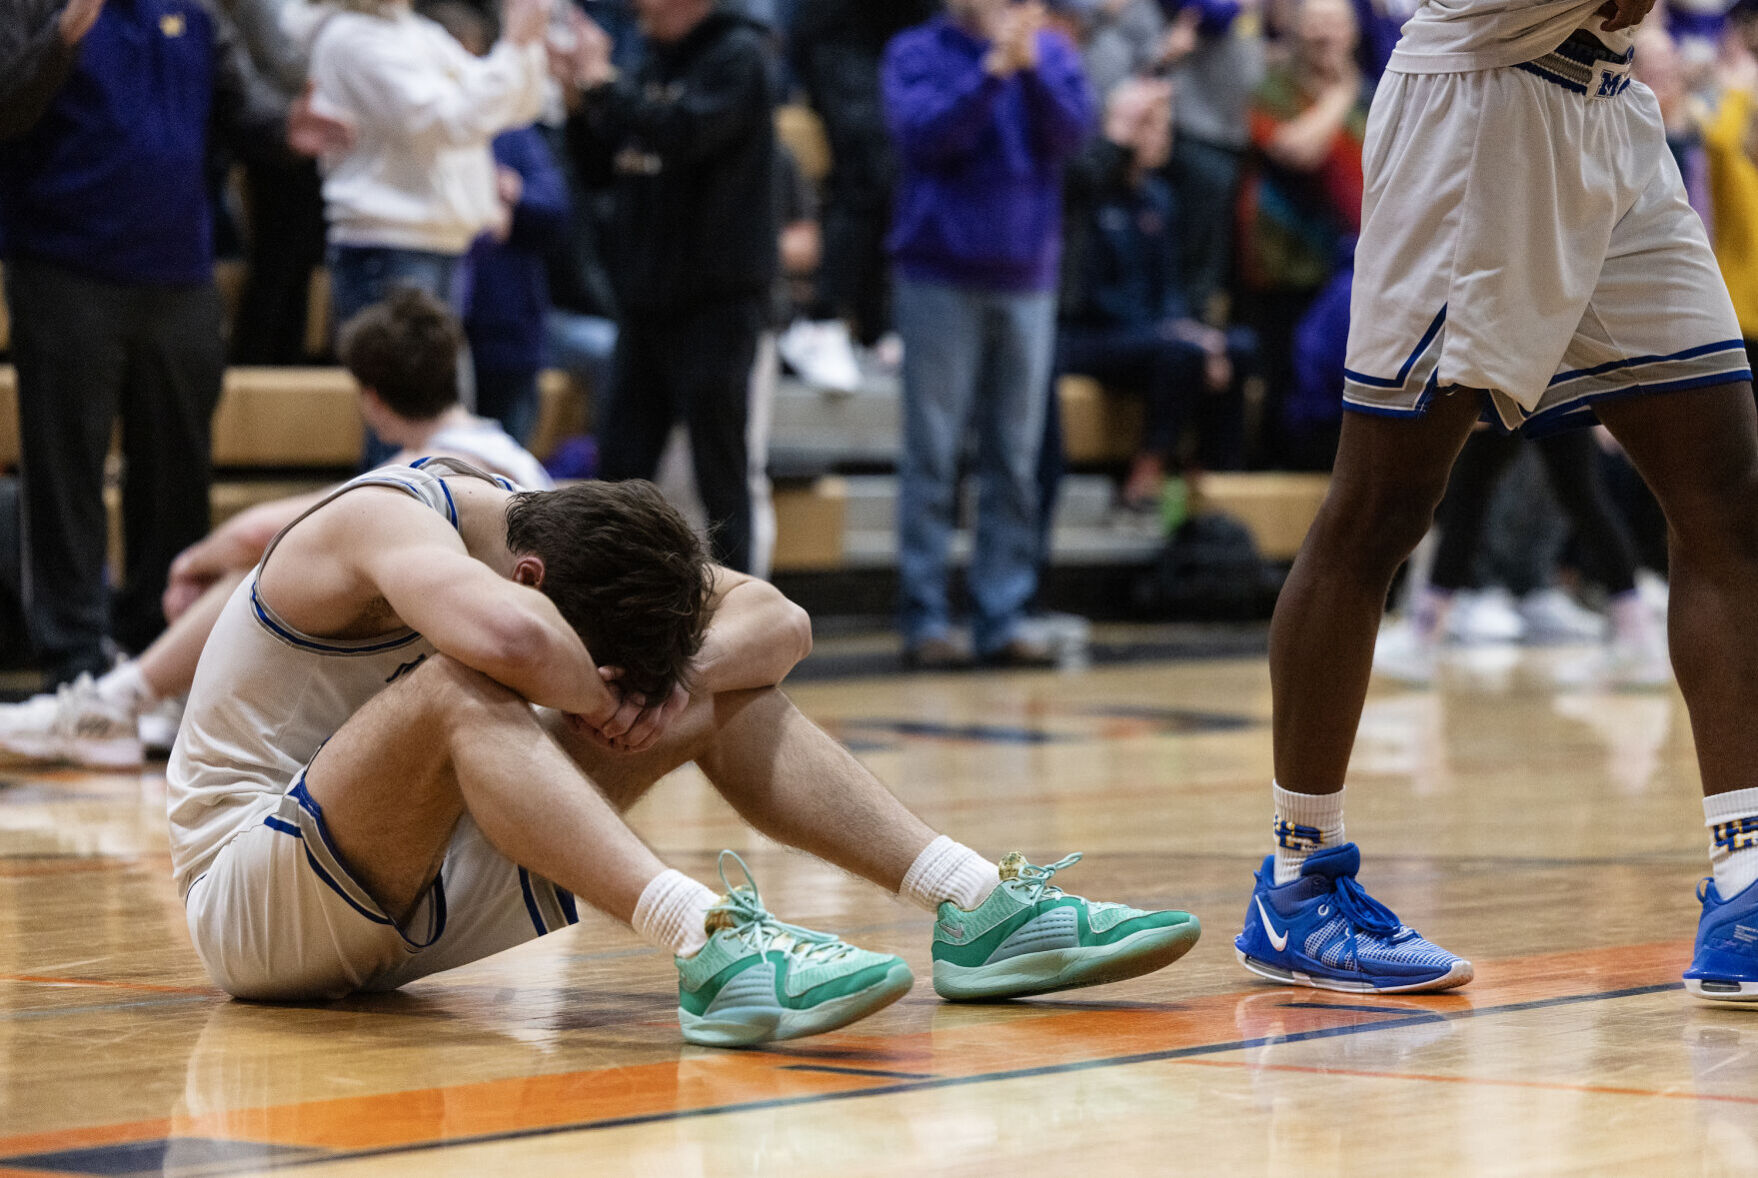 Williamsville secures Class 2A sectional title with thrilling one-point victory over Alton Marquette